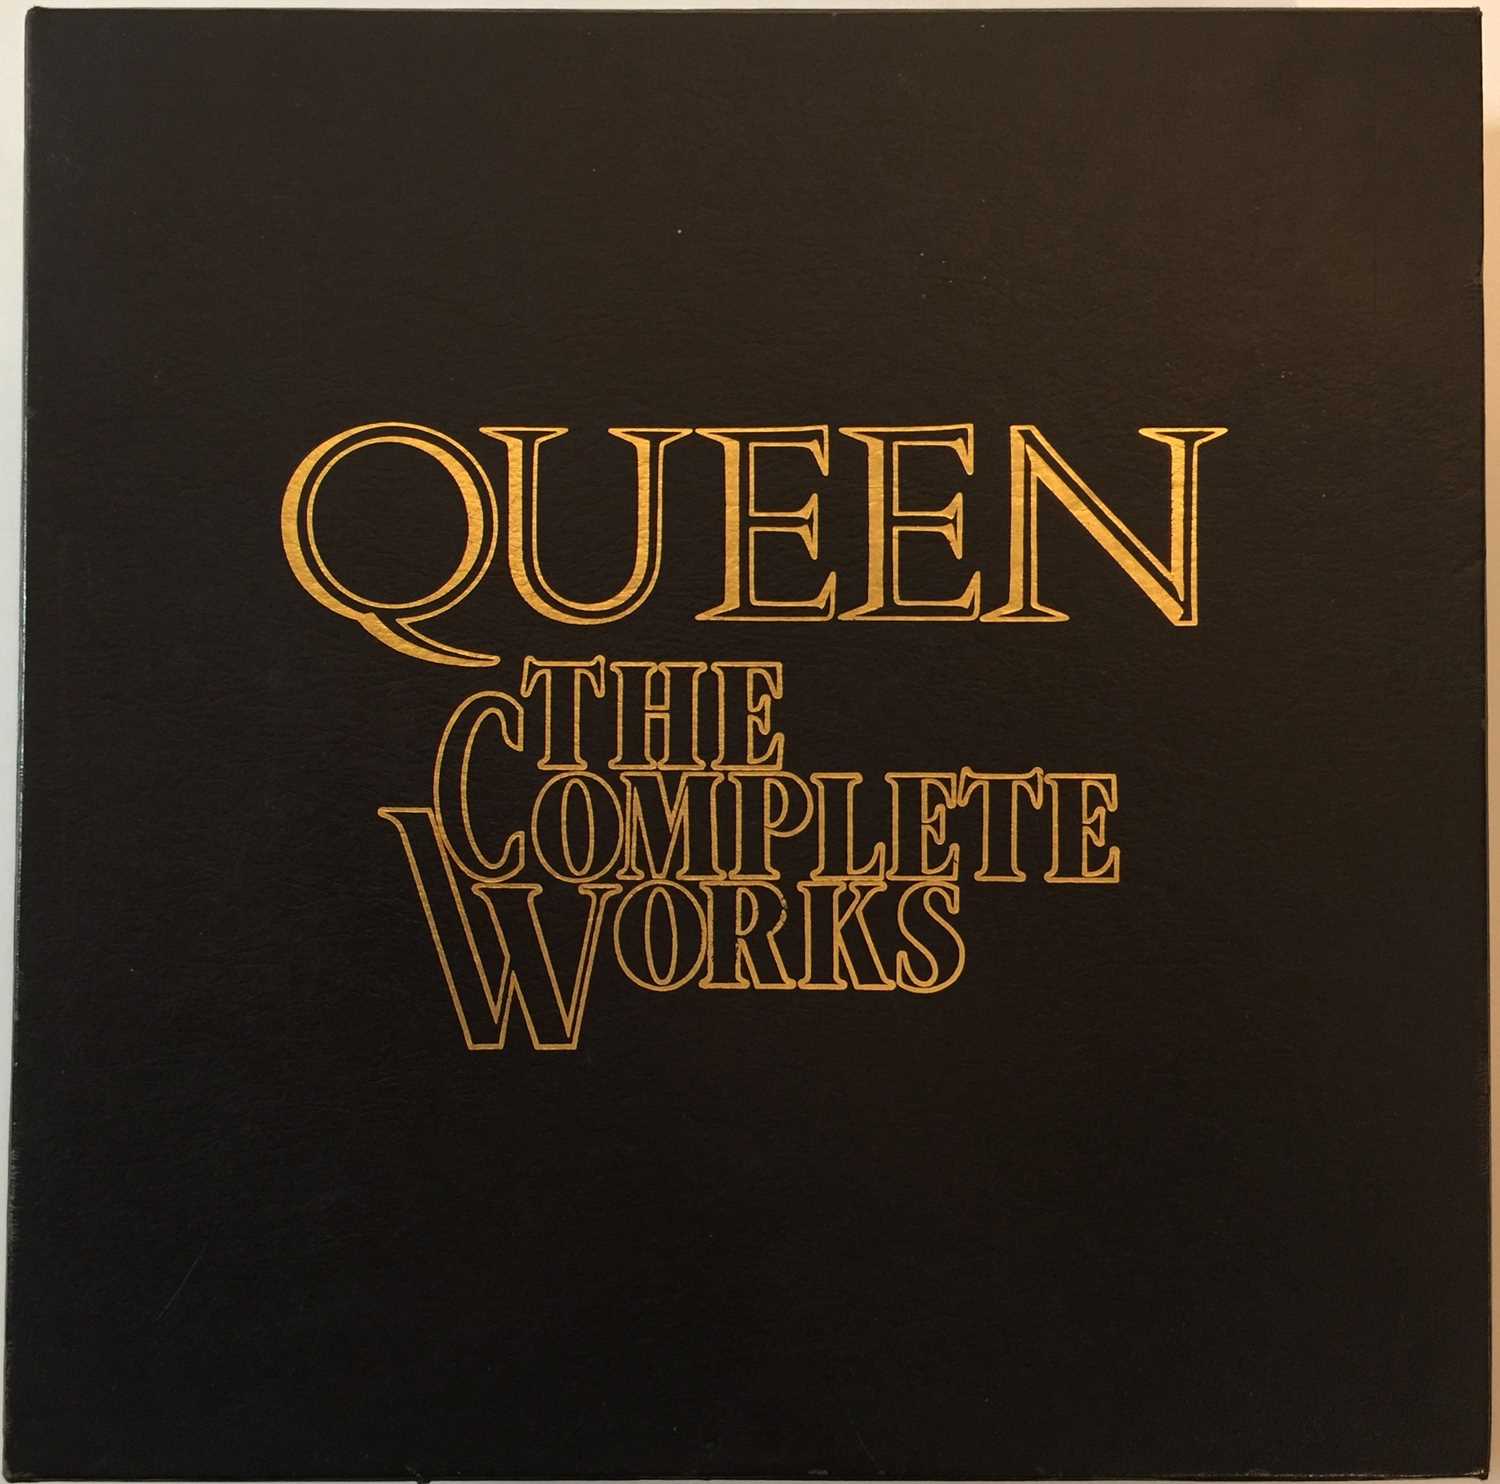 Lot 1 - QUEEN - THE COMPLETE WORKS 14 LP BOX SET (QB1 - ORIGINAL NUMBERED EDITION)